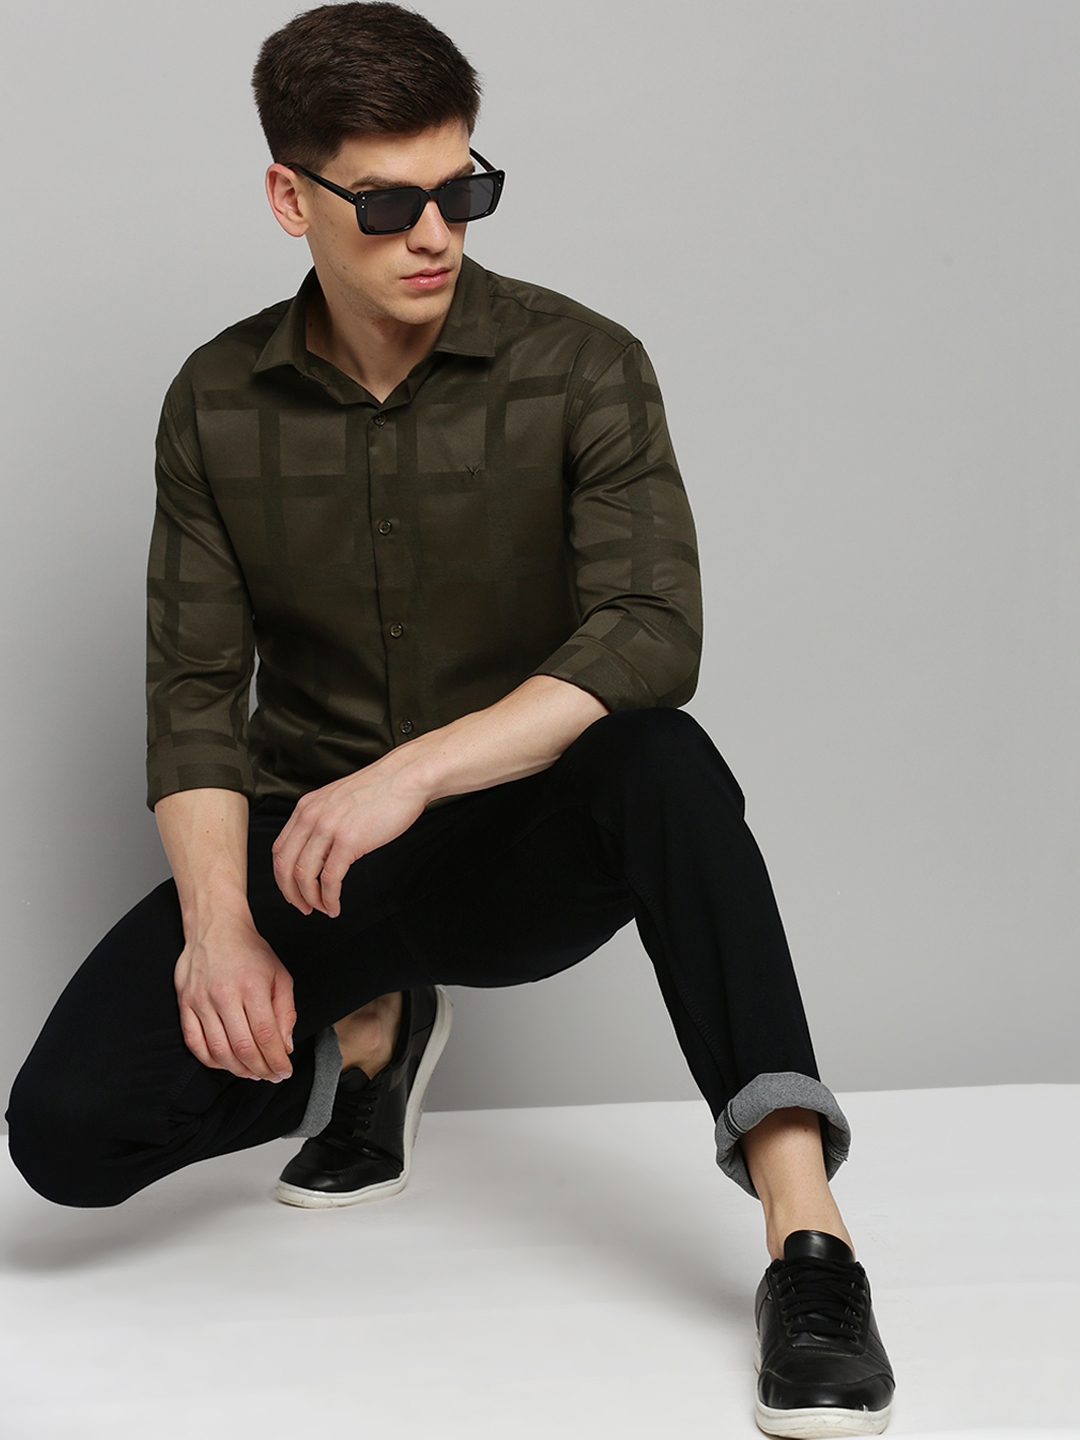 Showoff | SHOWOFF Men's Spread Collar Solid Olive Classic Shirt 4